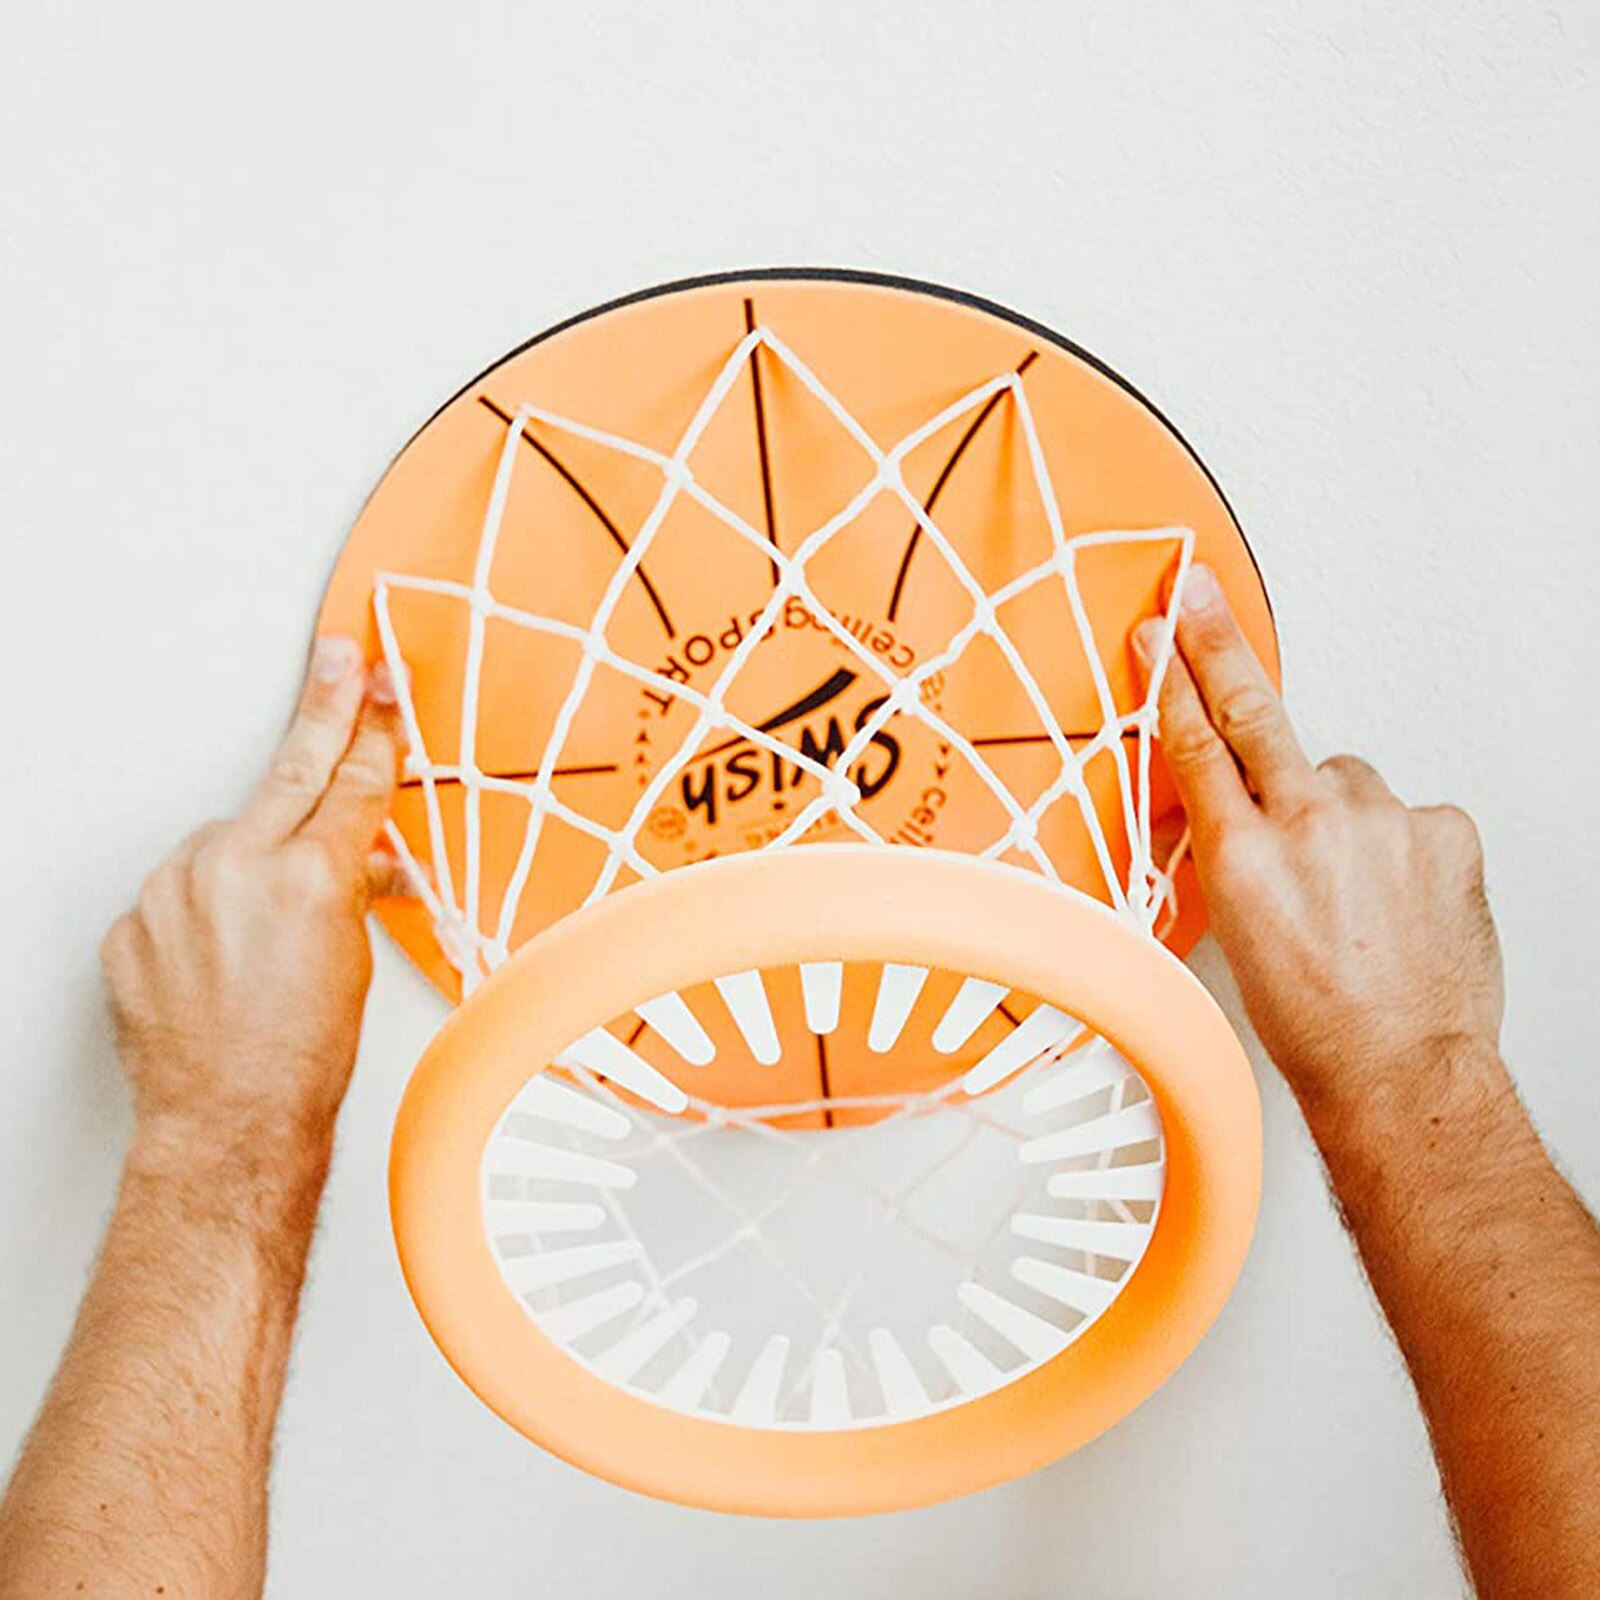 Ceiling Sport Indoor Mini Basketball Hoop For Kids Toy Game Shooting Toy Bedroom Parent-child Game Educational Toys D9#